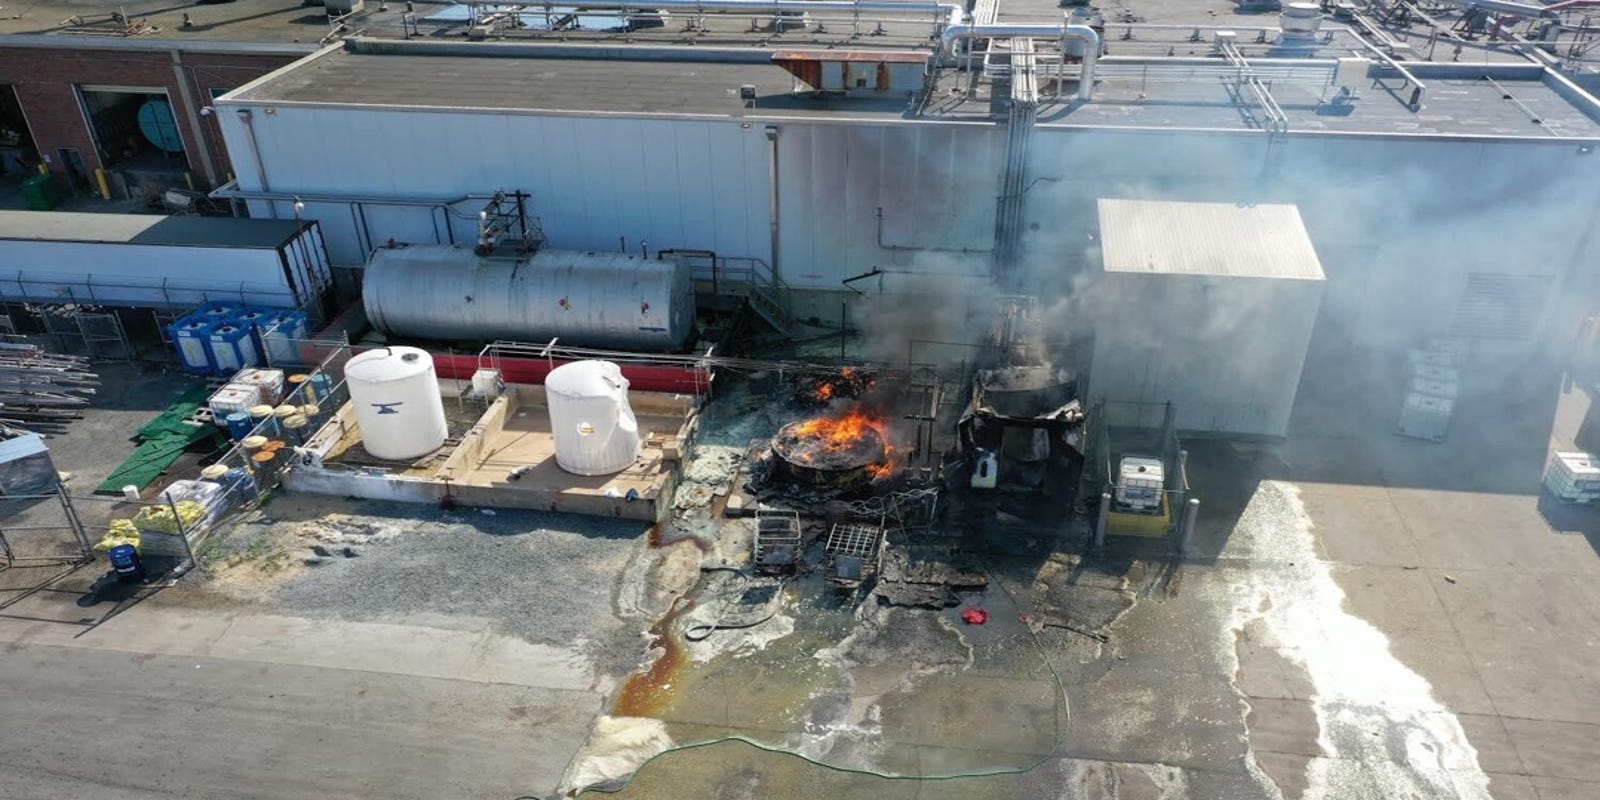 Perdue facility fire had 'multiple explosions, but site up and running